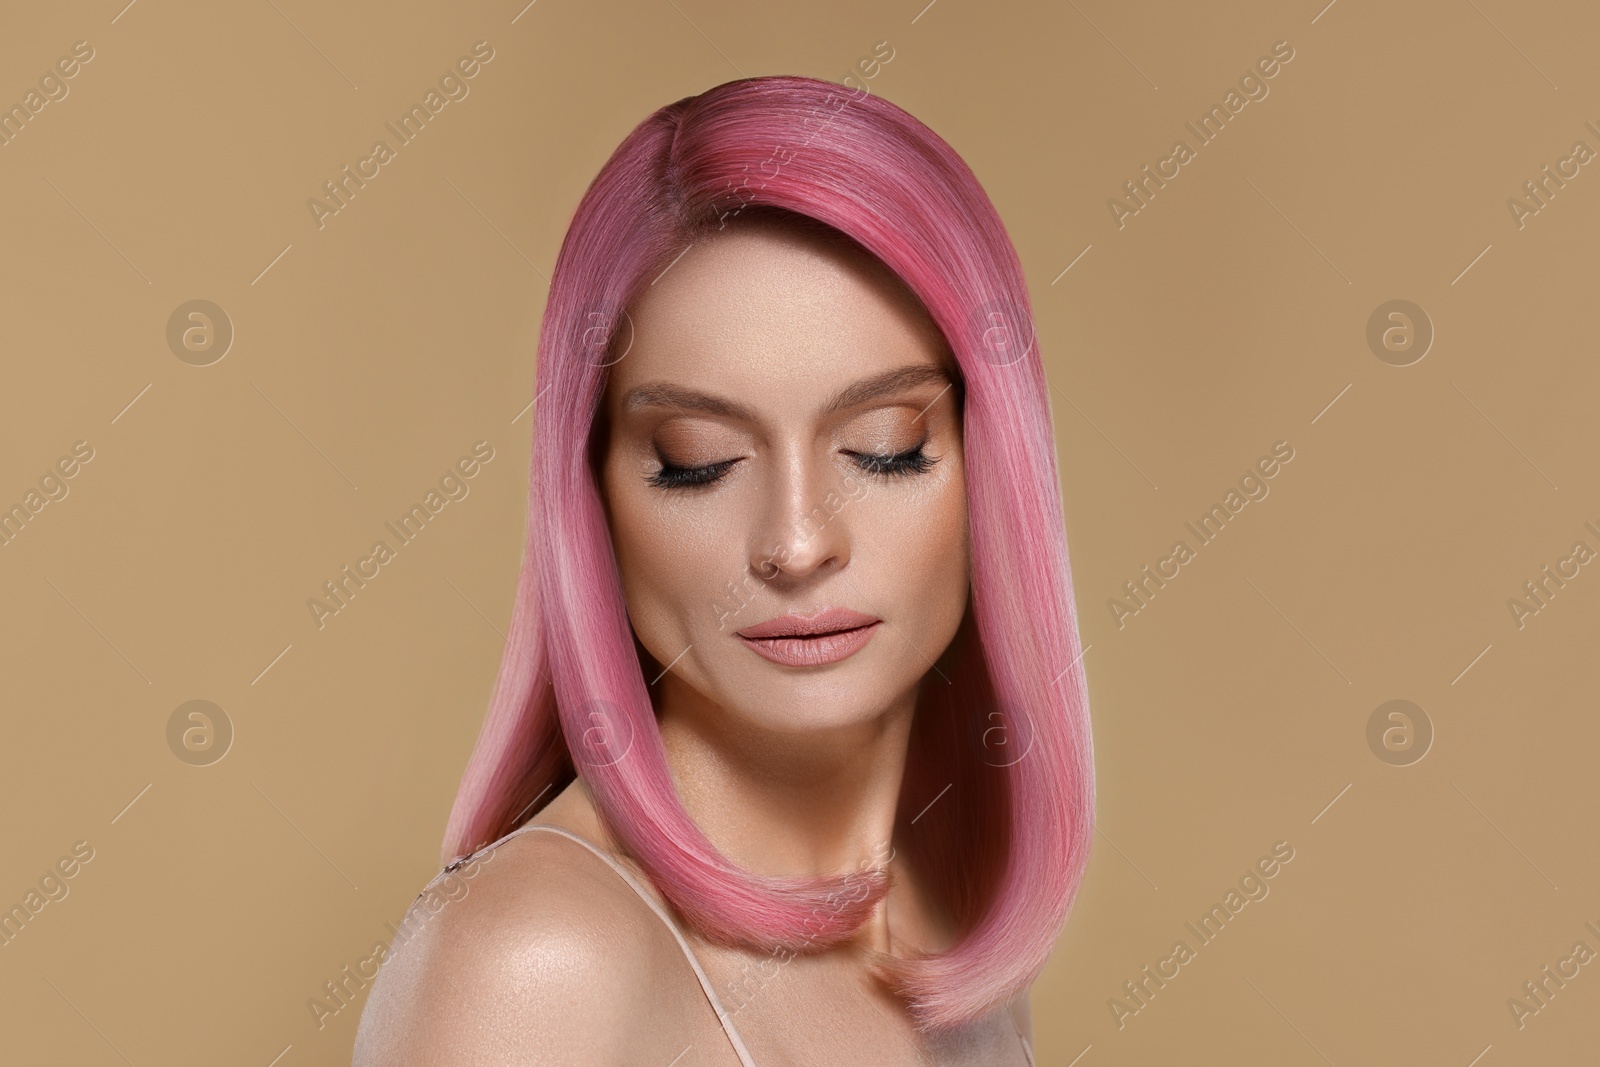 Image of Hair styling. Gorgeous woman with colorful hair on beige background